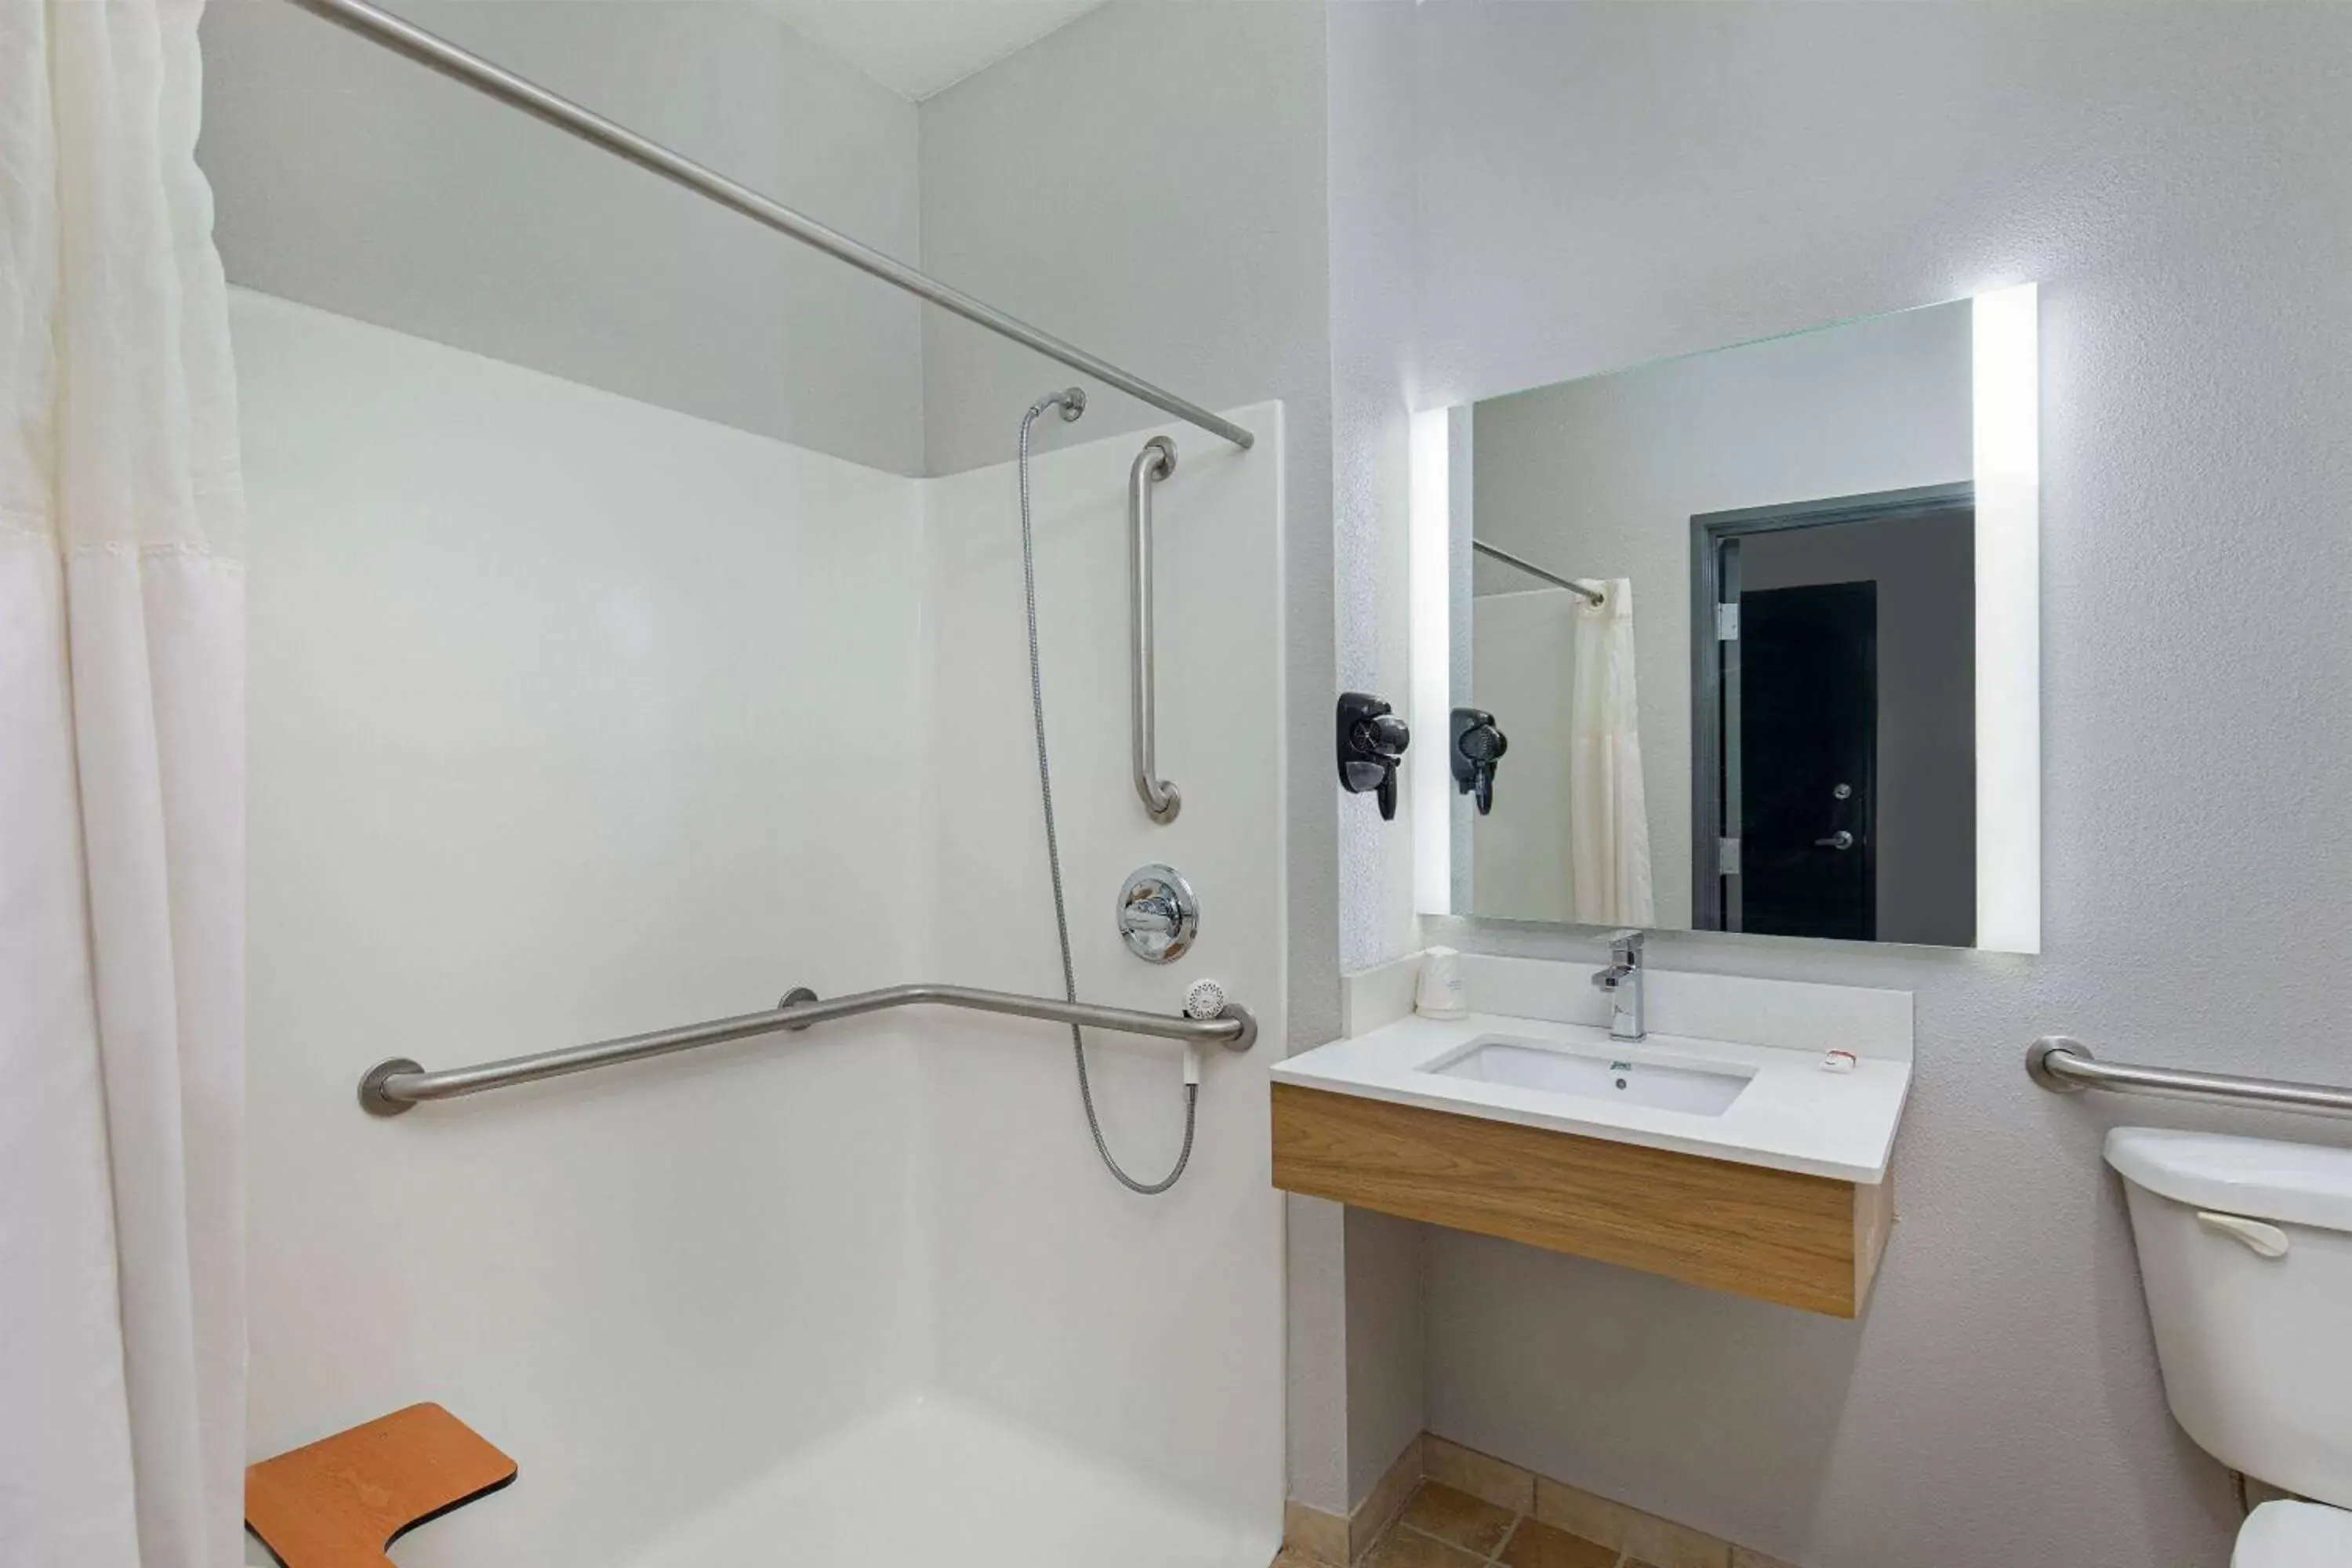 Shower, Bathroom in Microtel Inn & Suites by Wyndham Manchester - Newly Renovated